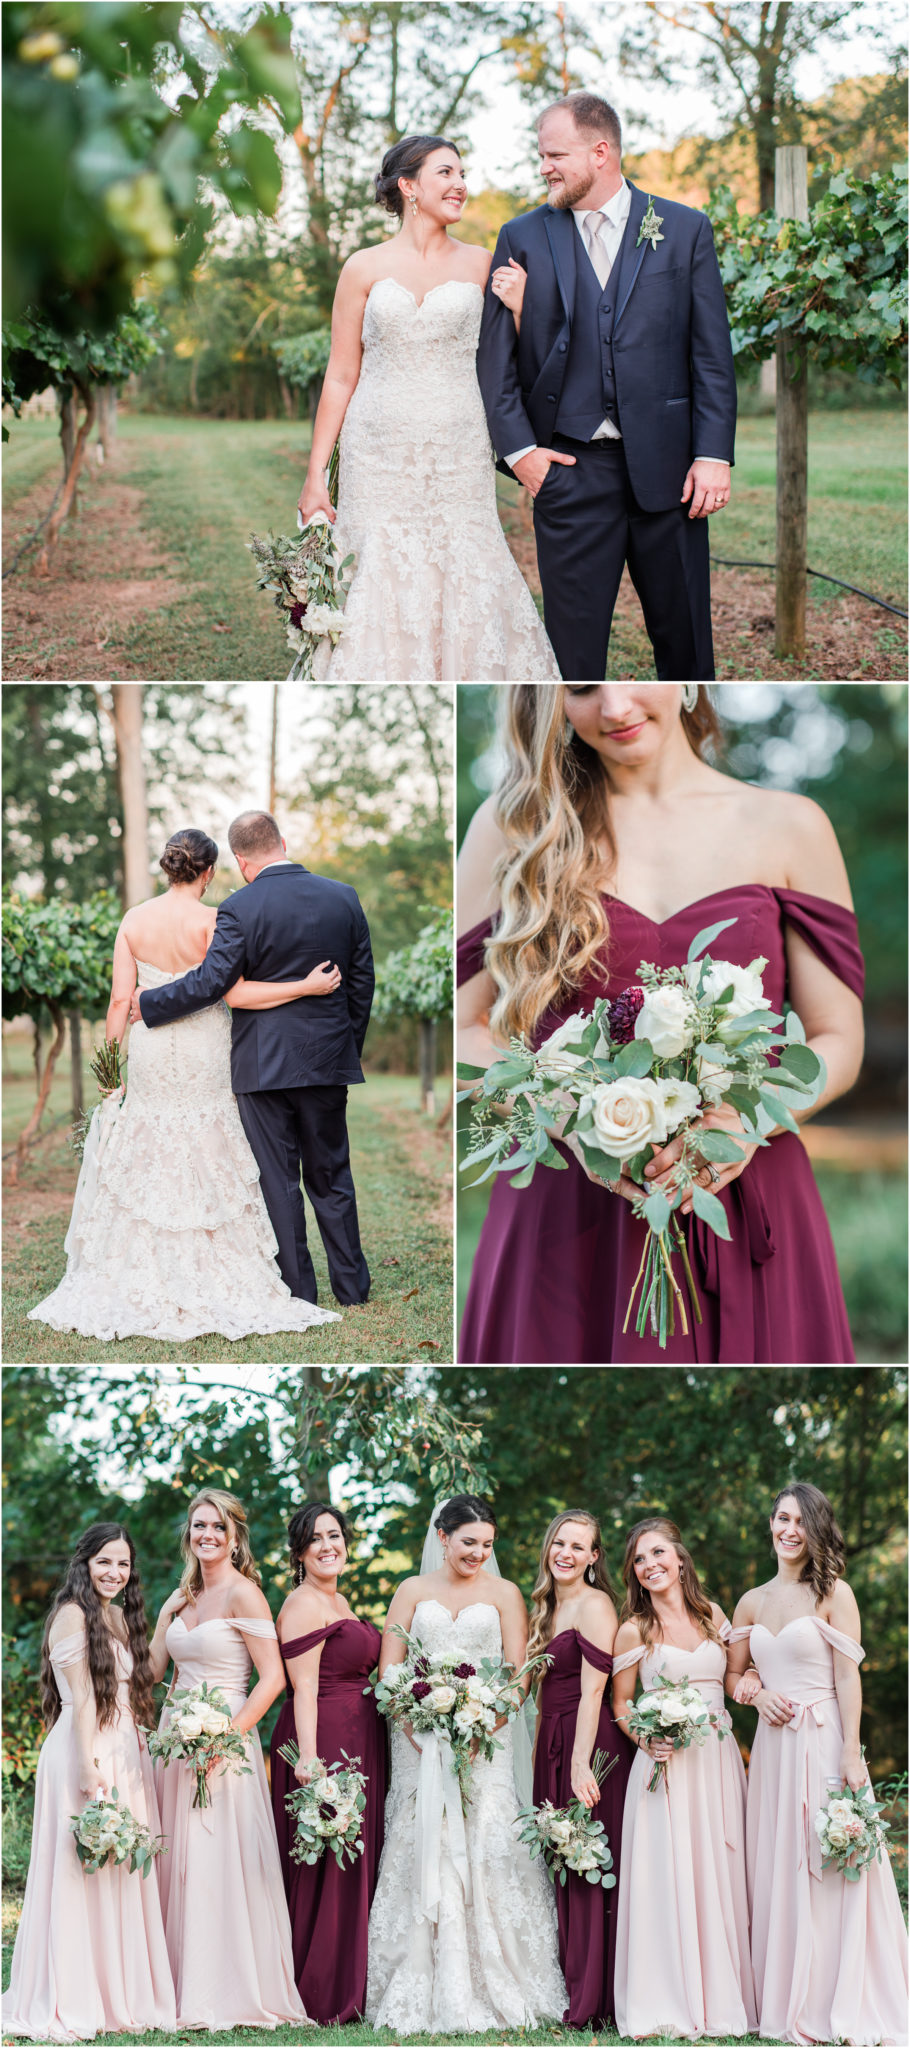 A Vineyard Wedding at Cityscape Winery in Pelter, SC Bride & Groom Portraits